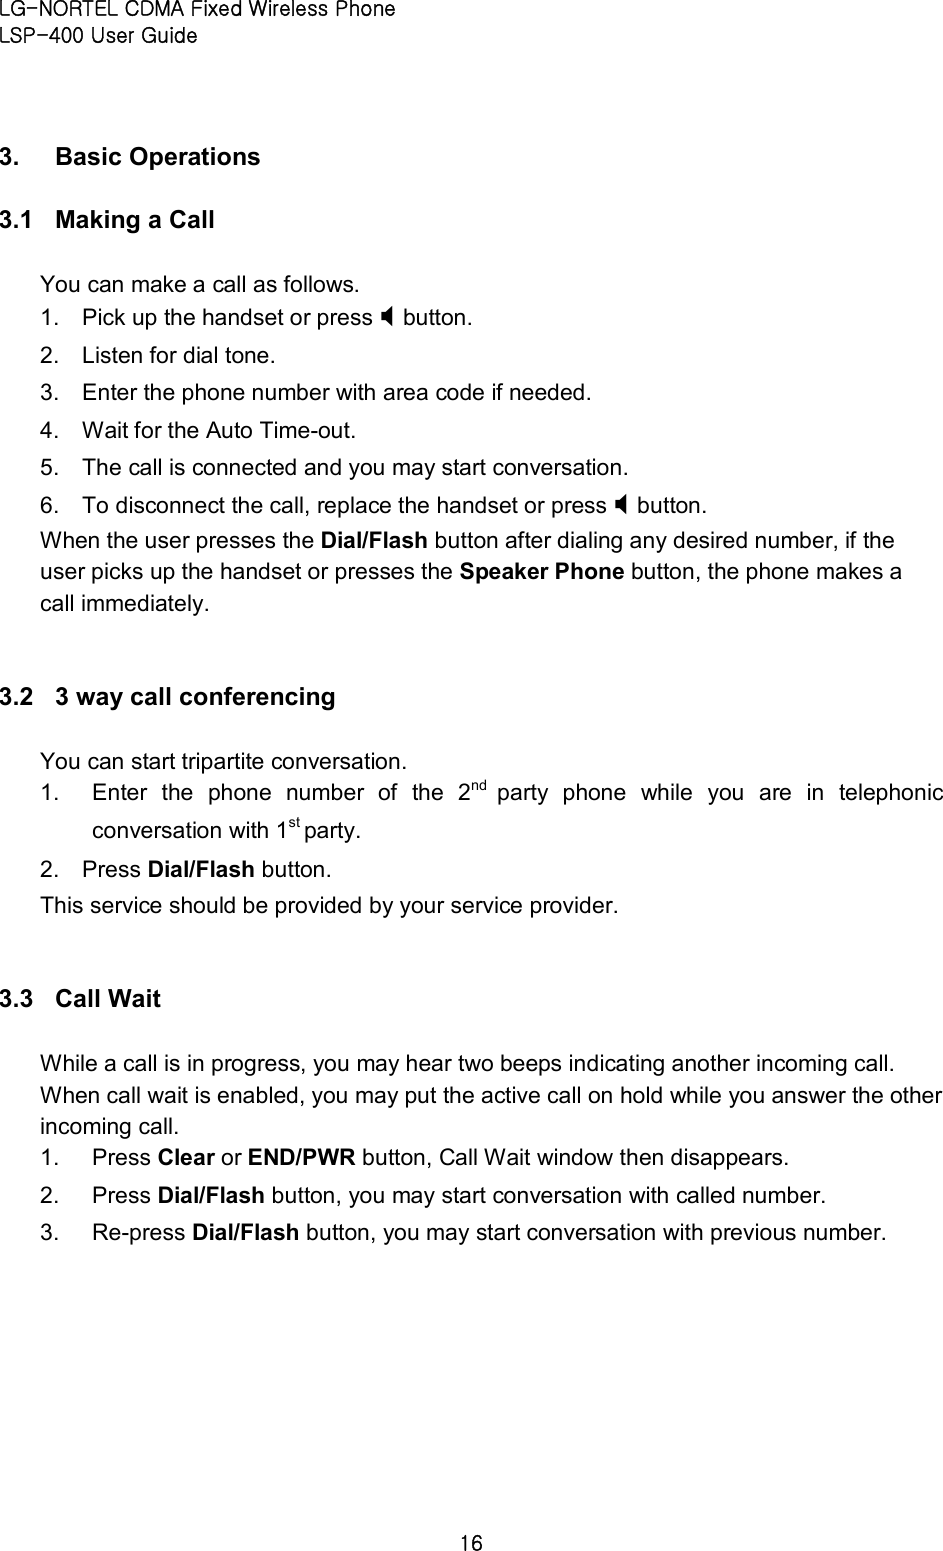 LG-NORTEL CDMA Fixed Wireless Phone   LSP-400 User Guide 16 3.  Basic Operations   3.1  Making a Call   You can make a call as follows.   1.  Pick up the handset or press X button.   2.  Listen for dial tone.   3.  Enter the phone number with area code if needed.   4.  Wait for the Auto Time-out.   5.  The call is connected and you may start conversation.   6.  To disconnect the call, replace the handset or press X button.   When the user presses the Dial/Flash button after dialing any desired number, if the user picks up the handset or presses the Speaker Phone button, the phone makes a call immediately.  3.2  3 way call conferencing   You can start tripartite conversation.   1.  Enter  the  phone  number  of  the  2nd  party  phone  while  you  are  in  telephonic conversation with 1st party.   2.  Press Dial/Flash button.   This service should be provided by your service provider.  3.3  Call Wait   While a call is in progress, you may hear two beeps indicating another incoming call. When call wait is enabled, you may put the active call on hold while you answer the other incoming call.   1.  Press Clear or END/PWR button, Call Wait window then disappears.   2.  Press Dial/Flash button, you may start conversation with called number.   3.  Re-press Dial/Flash button, you may start conversation with previous number.  